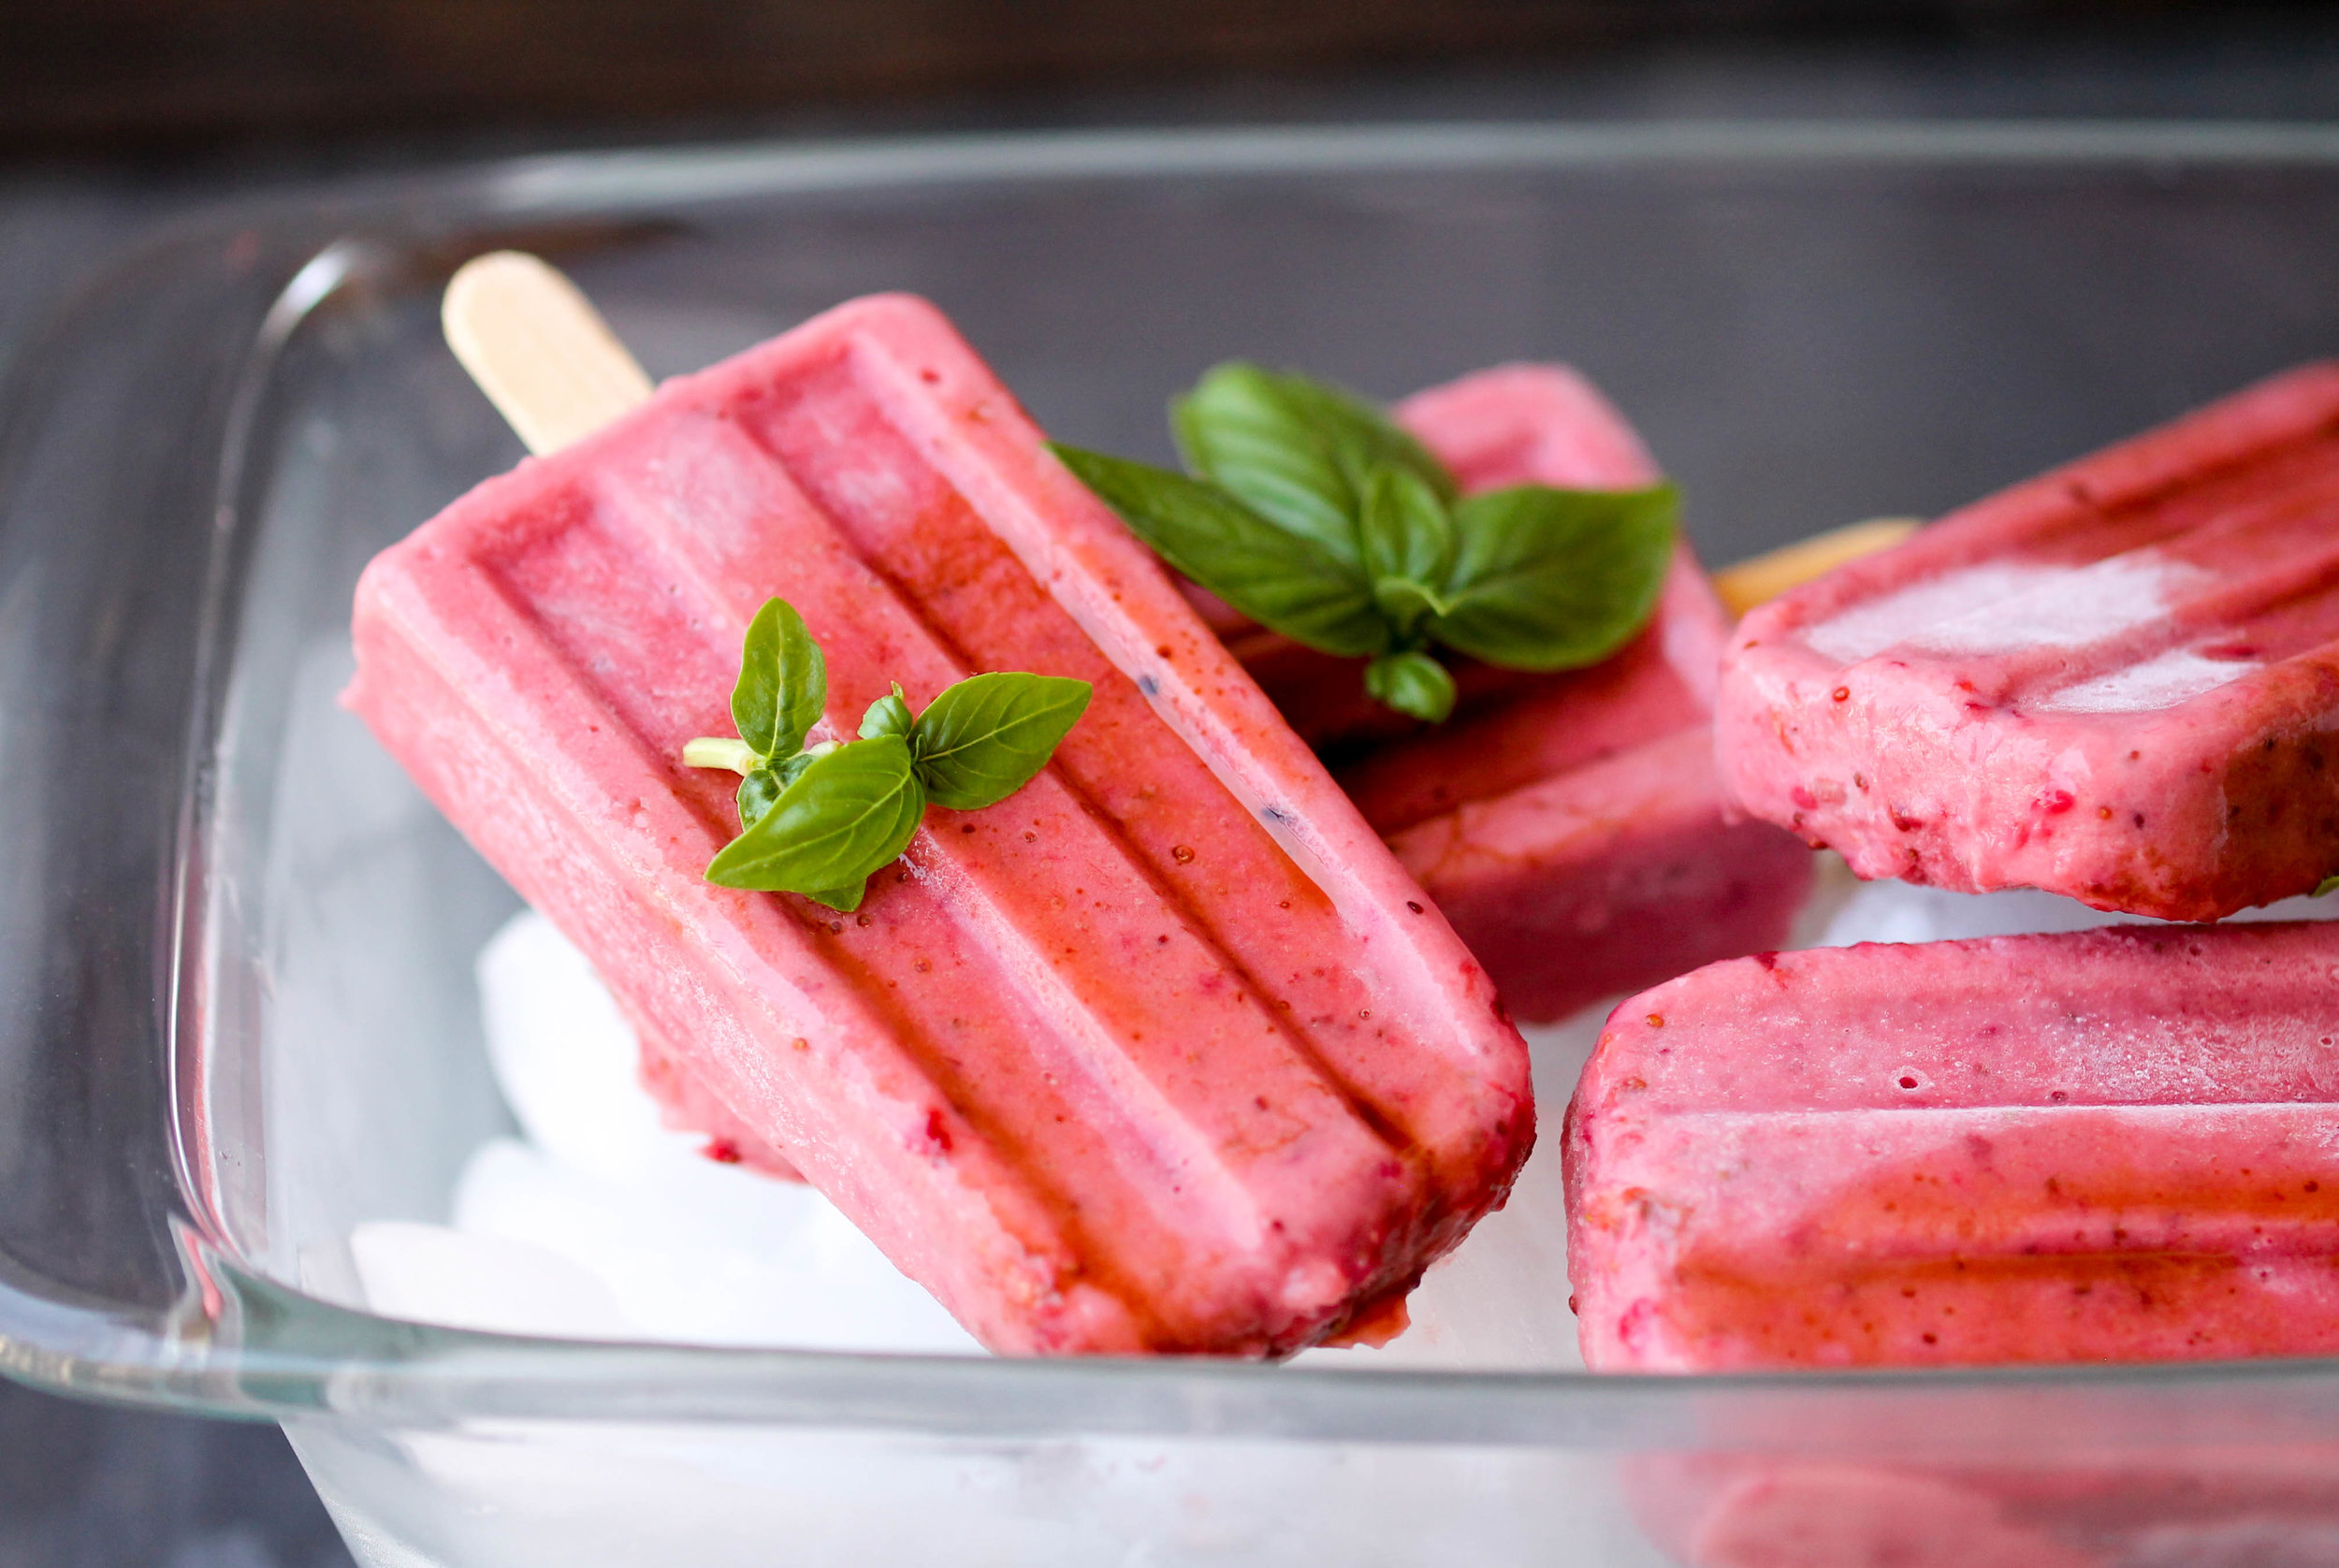 Balsamic Roasted Strawberry Popsicles - 4 Ingredients, Easy Vegan Popsicles for everyone to enjoy this Summer!